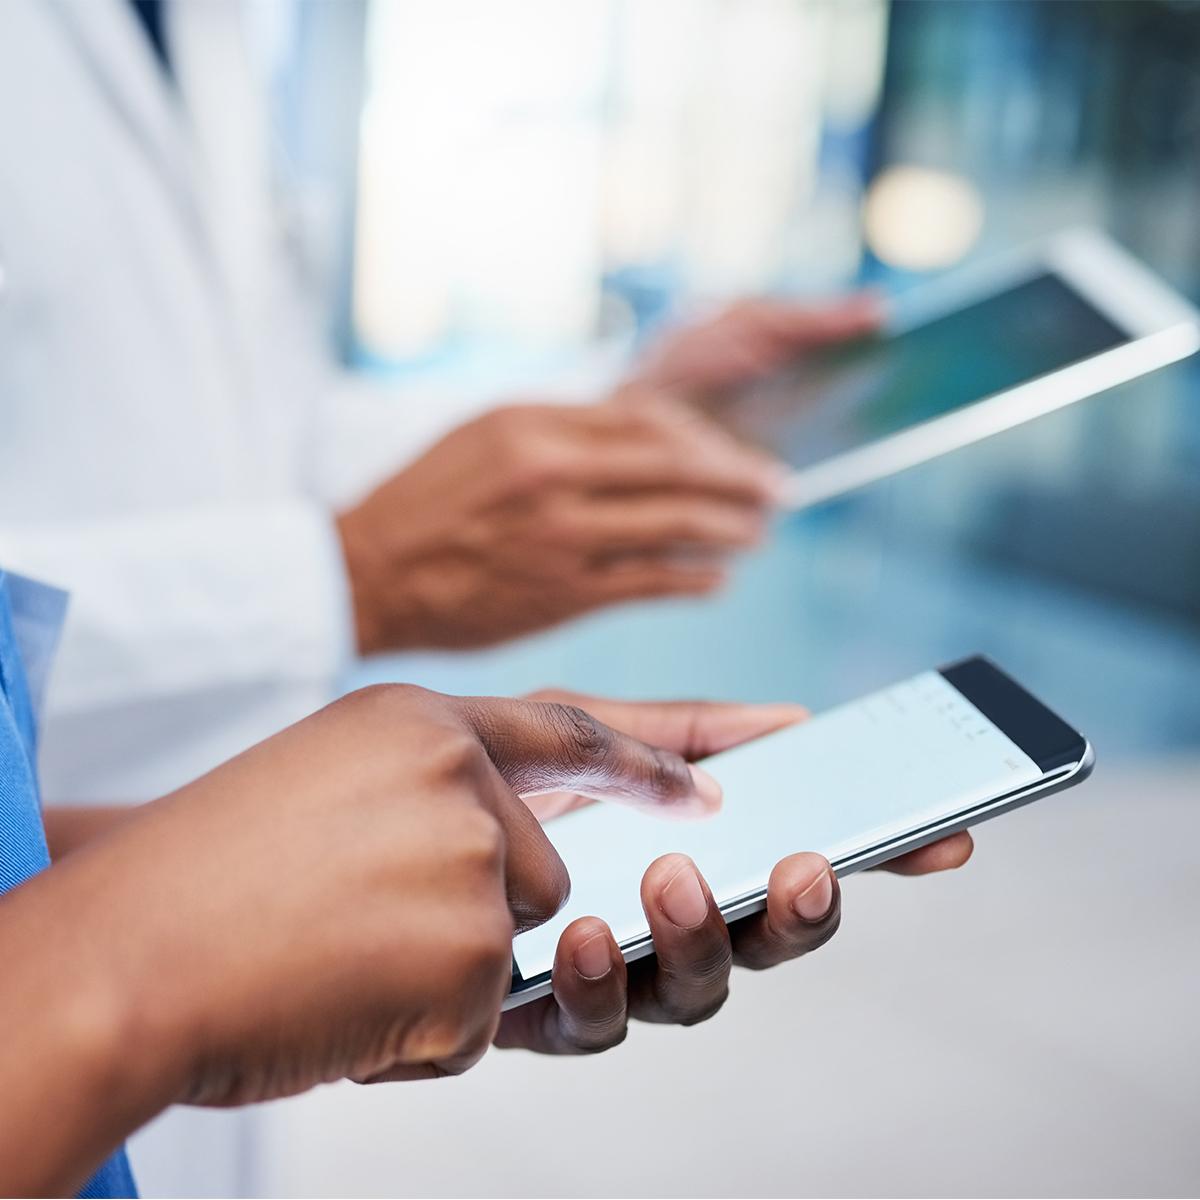 A clinician in blue scrubs and a physician in a lab coat send and receive information on their smartphones